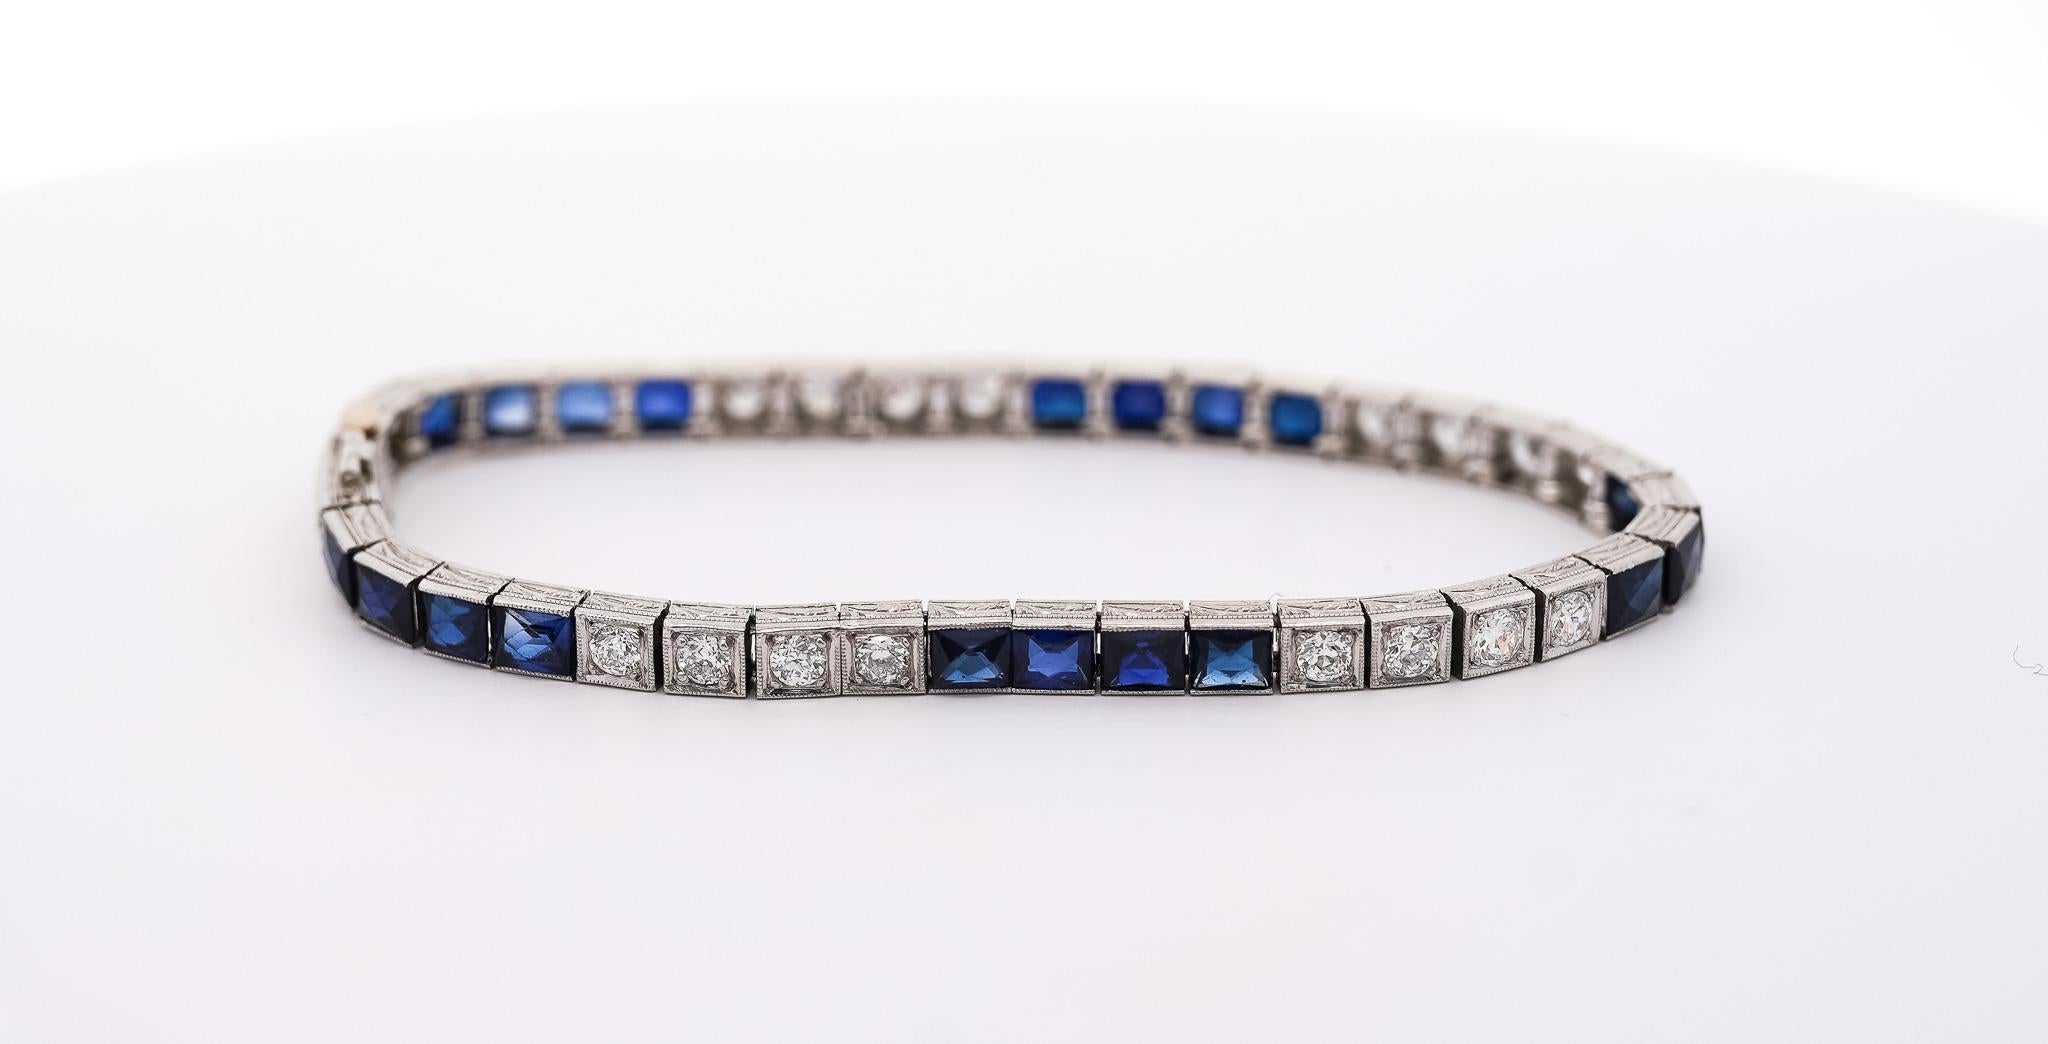 Vintage Platinum Filigree Bracelet with Diamonds and Synthetic Blue Sapphires. Circa 1935. 

Elevate your collection with this exquisite Vintage Art Deco Platinum Filigree Square Link Bracelet. Crafted with meticulous detail, this bracelet features